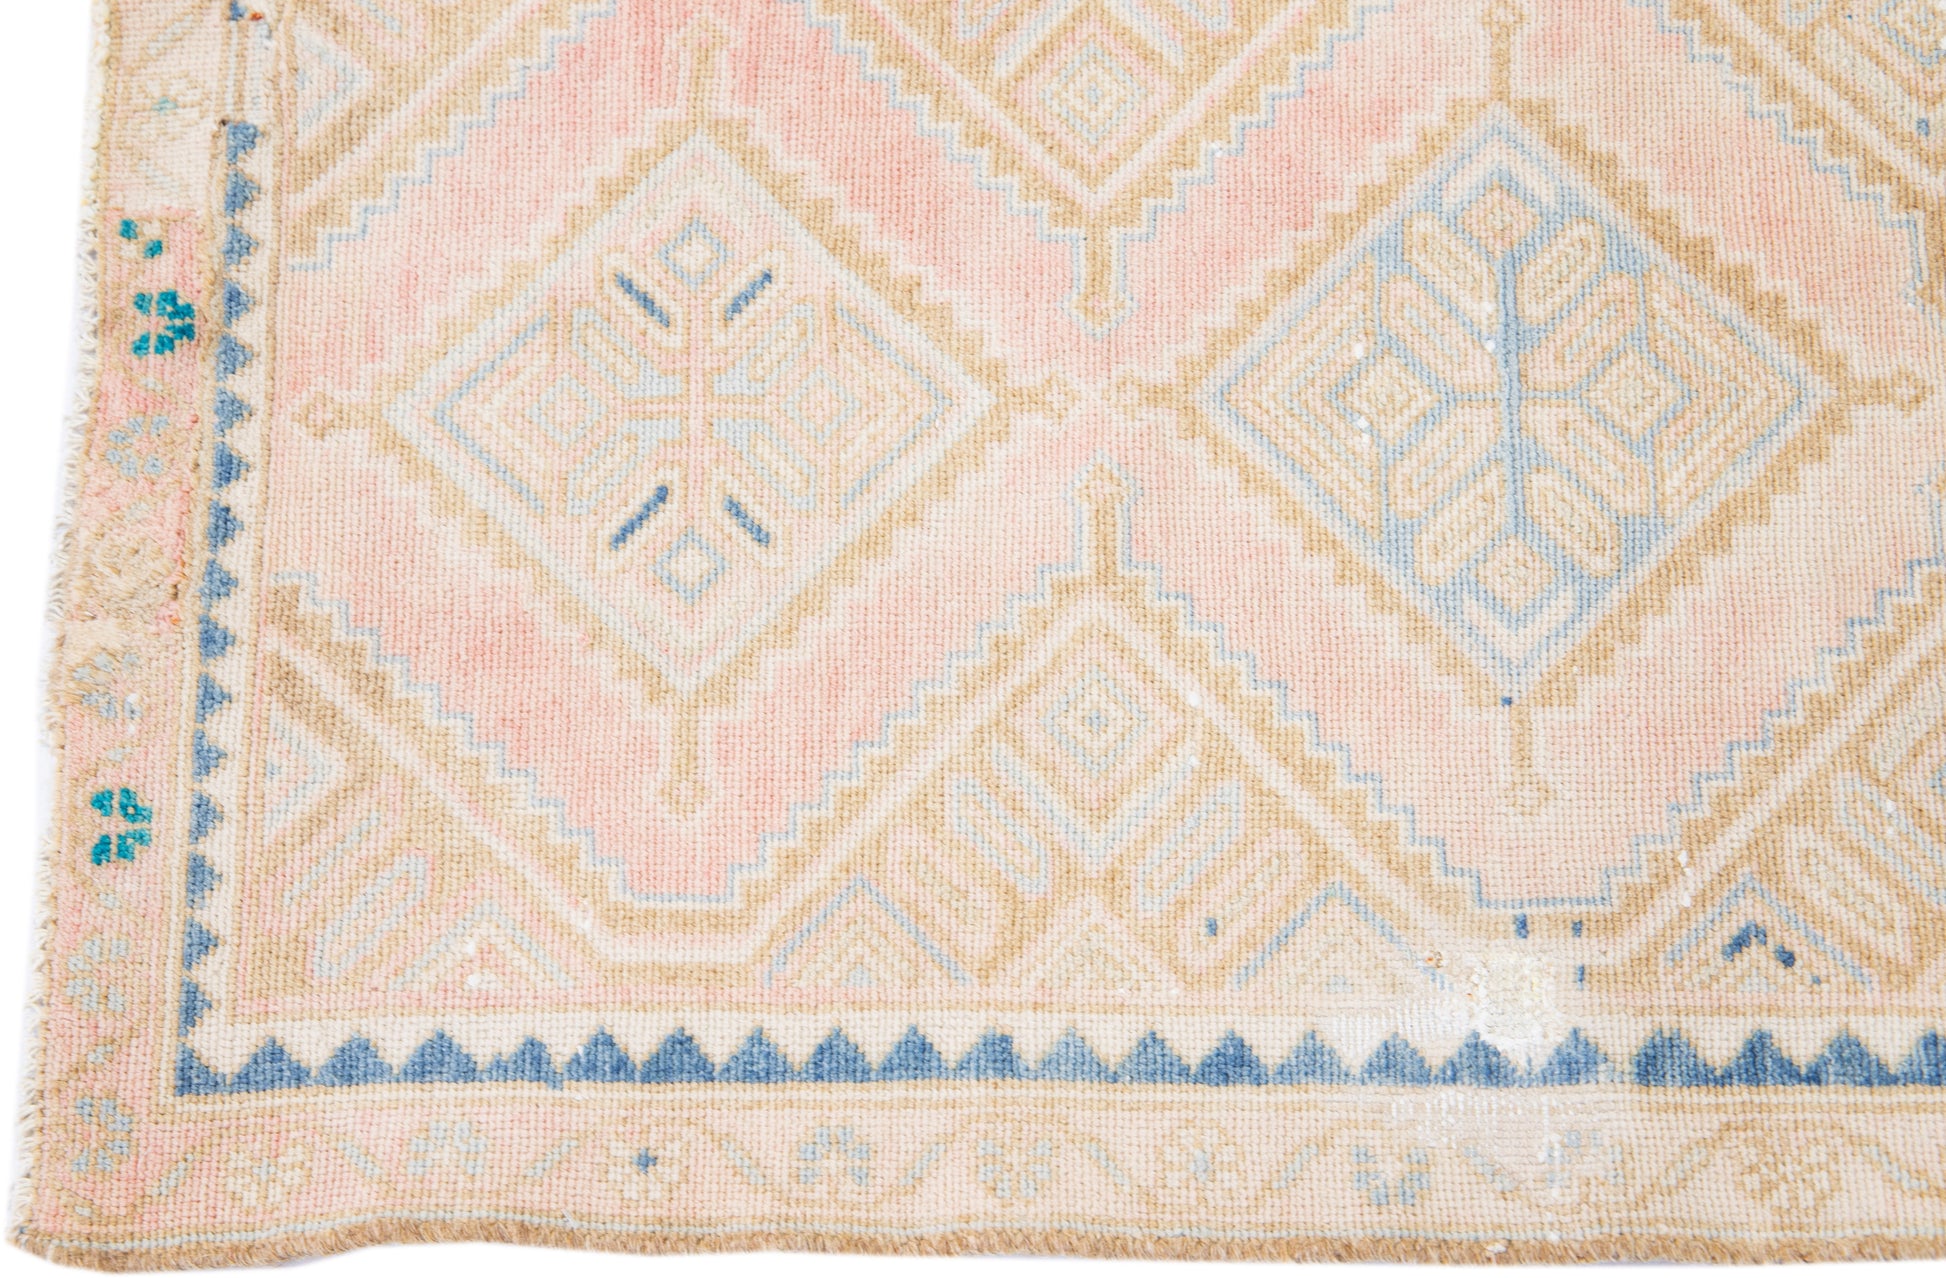 Close up of beige wool runner rug with repeating diamond motif